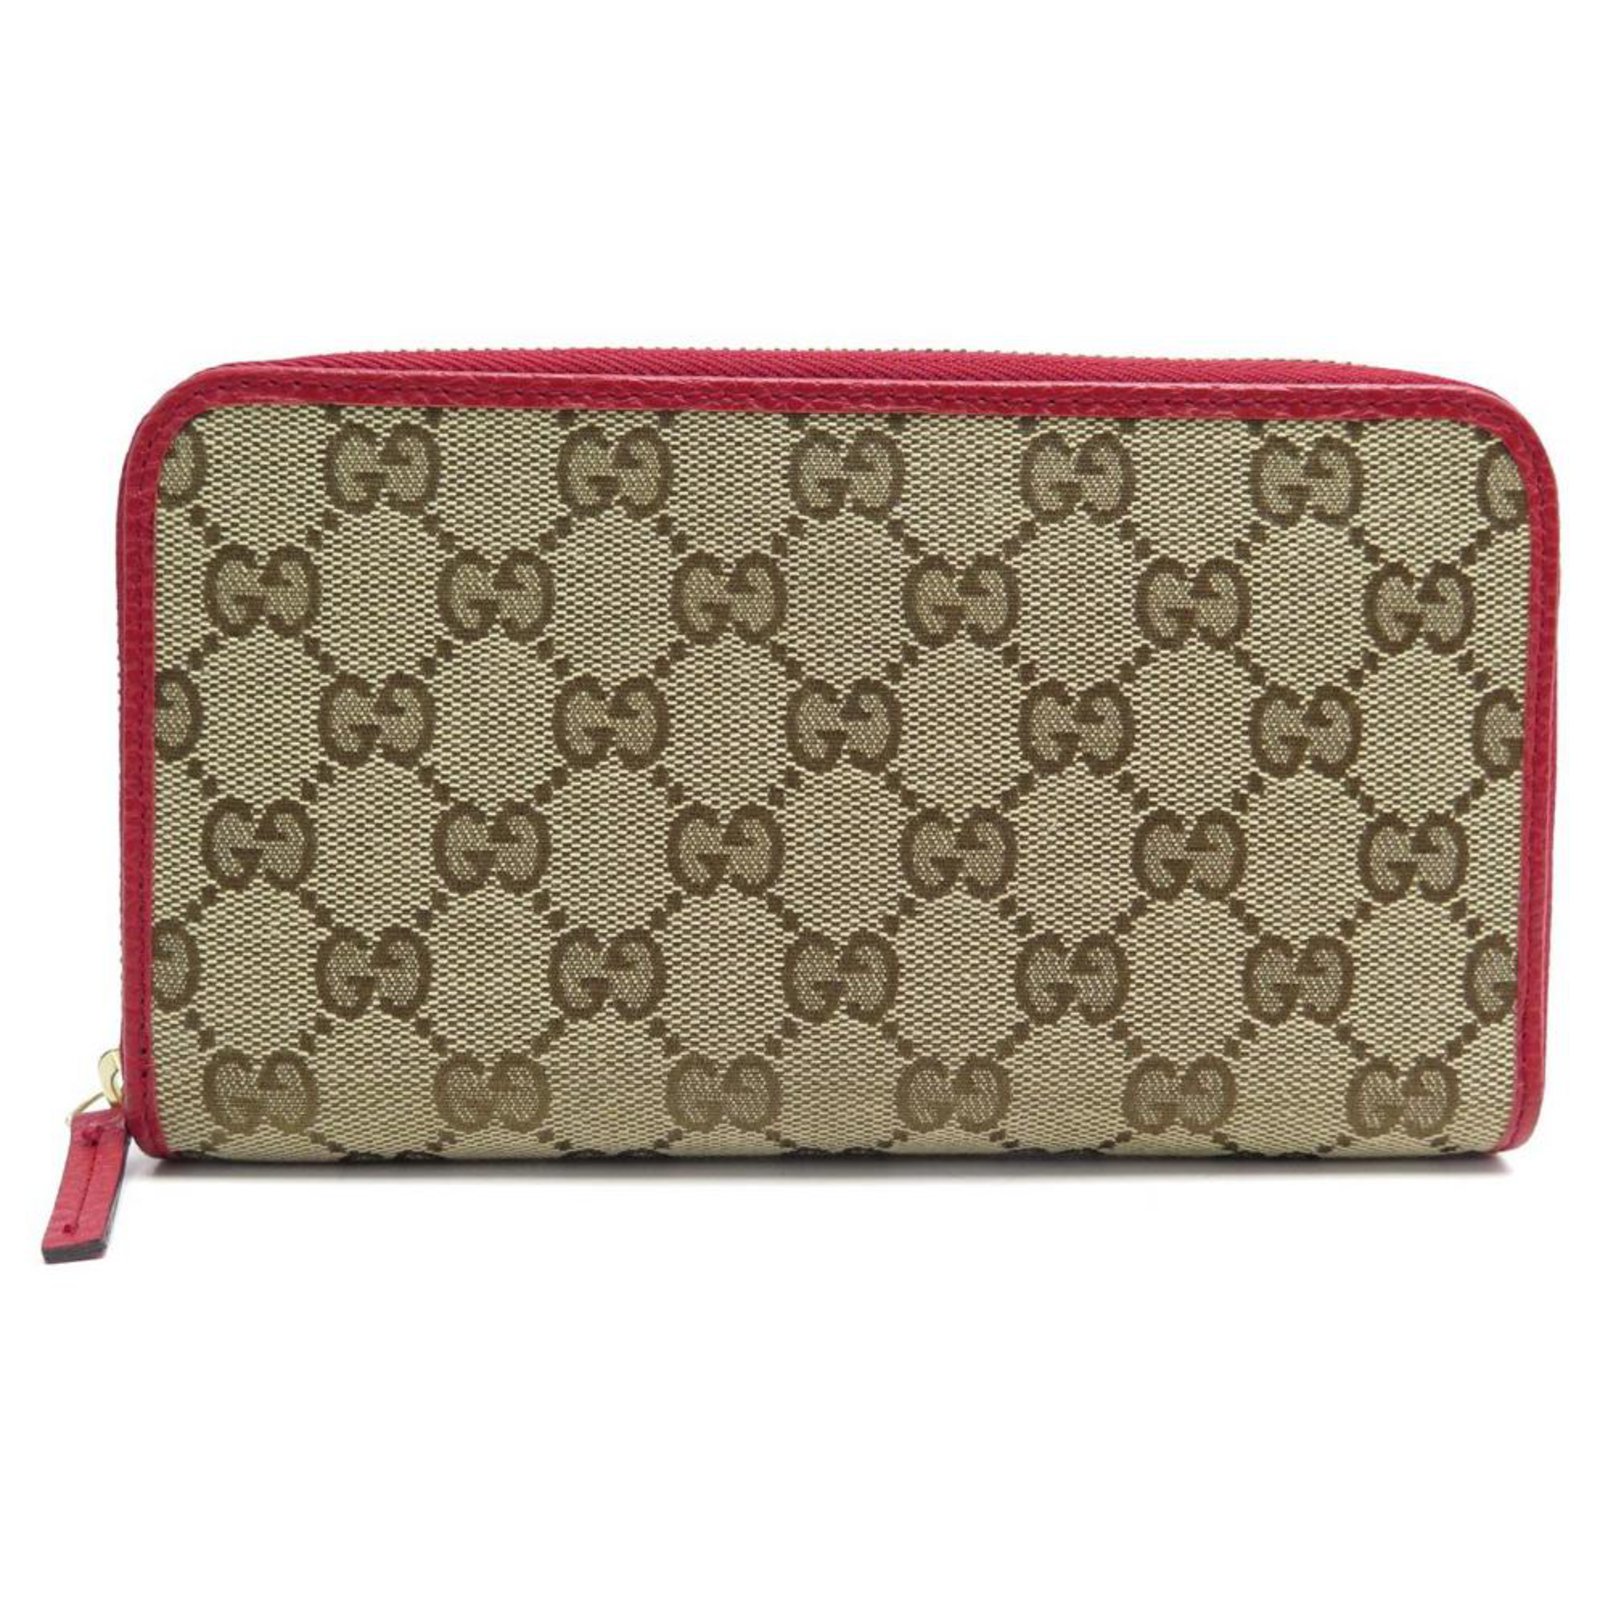 Gucci Double G Logo Guccisima Canvas Mens Wallet Brown Beige NEW